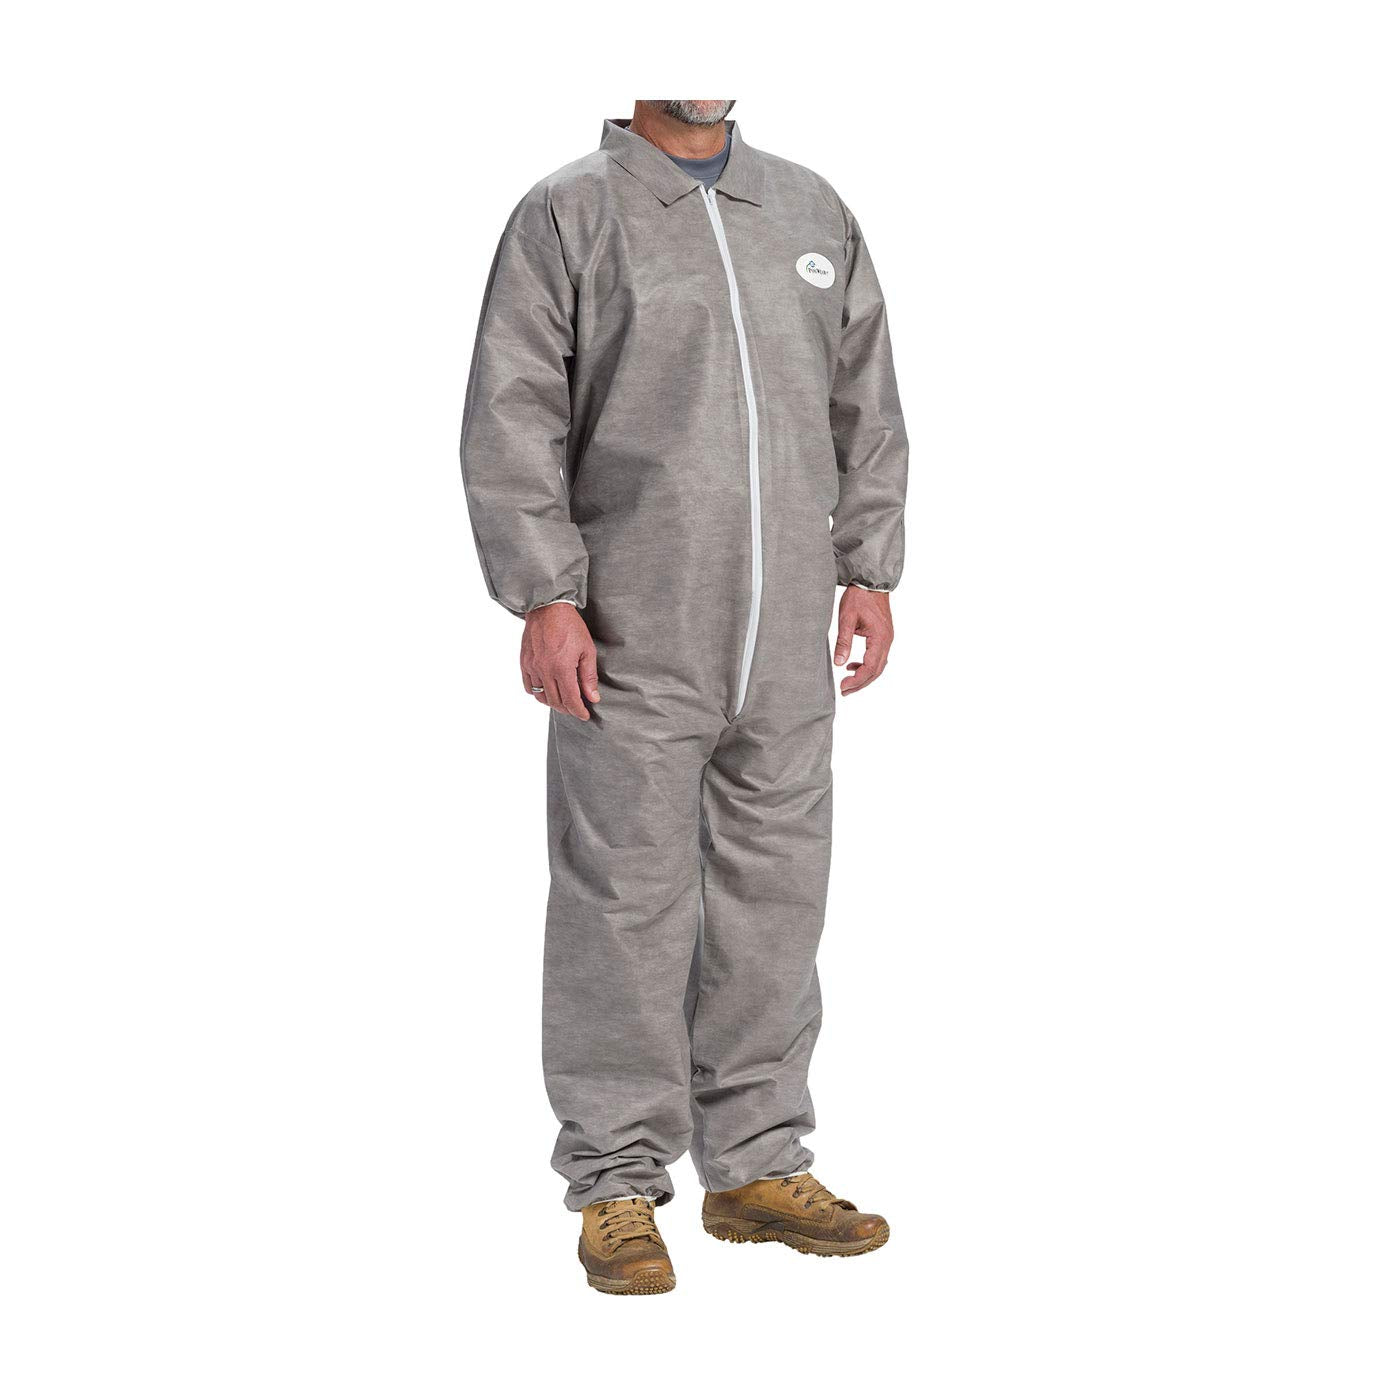 West Chester C3902 Gray 4XL Polypropylene Disposable General Purpose & Work Coveralls - Fits 29.1 in Chest - 30.3 in Inseam - Elastic Ankles, Elastic Wrists - C3902/XXXXL [PRICE is per EACH]